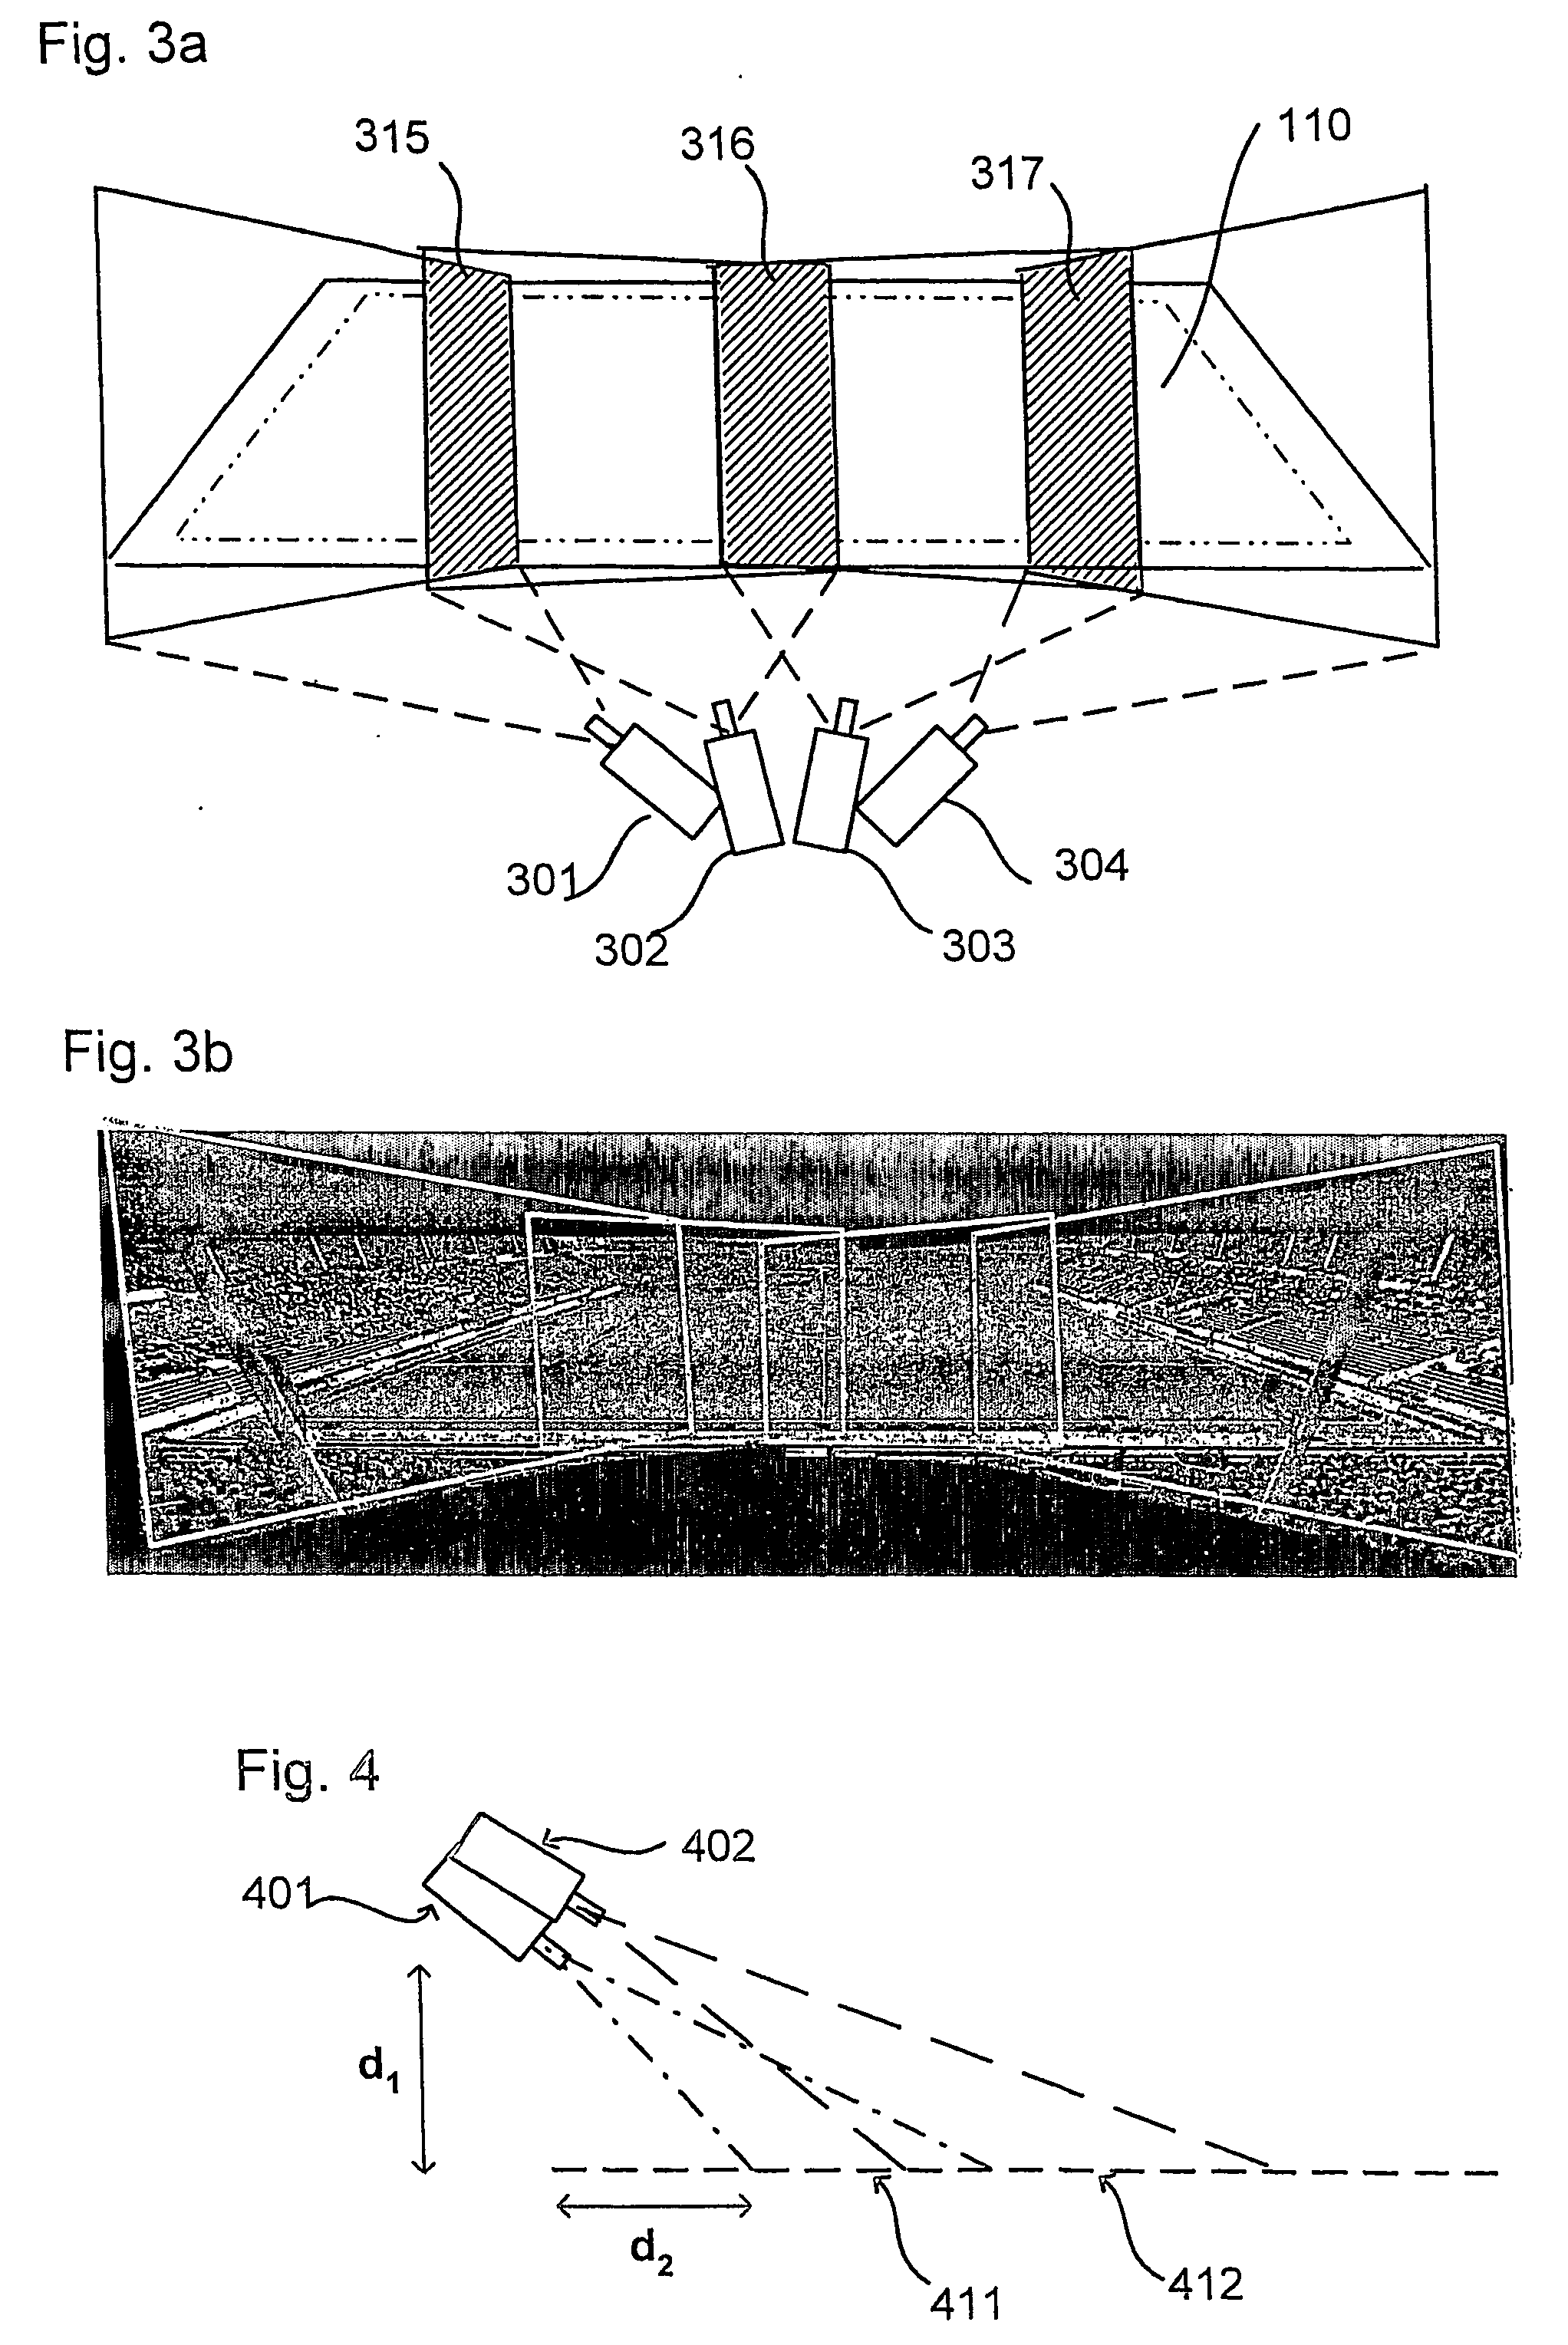 Method and device for generating wide image sequences